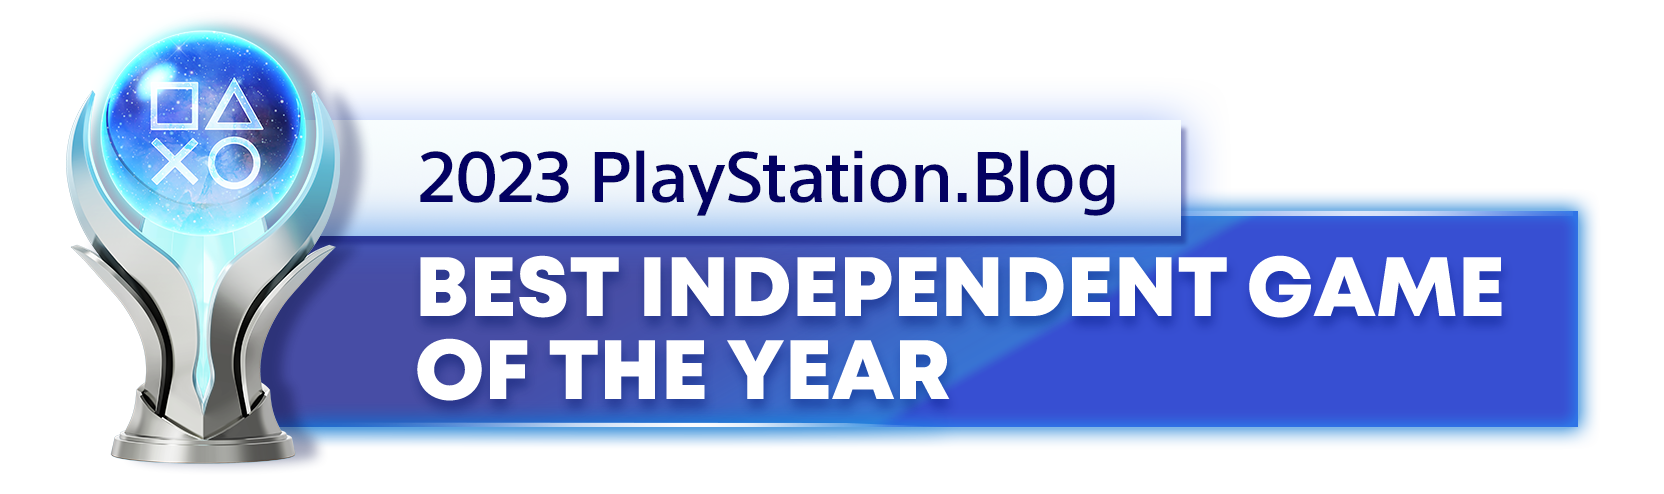  "Platinum Trophy for the 2023 PlayStation Blog Best Independent Game of the Year Winner"